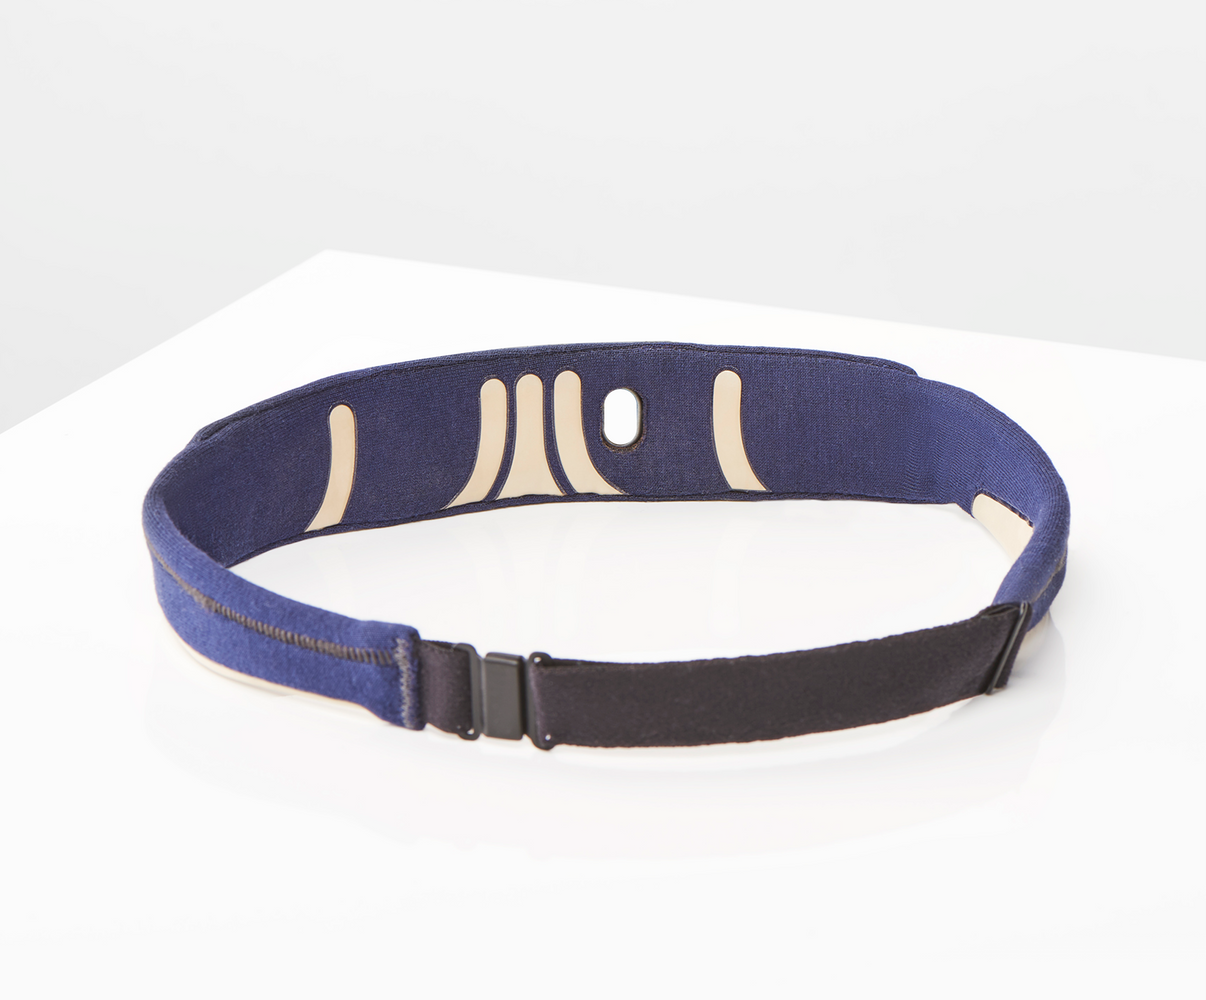 Muse S Additional Fabric Band